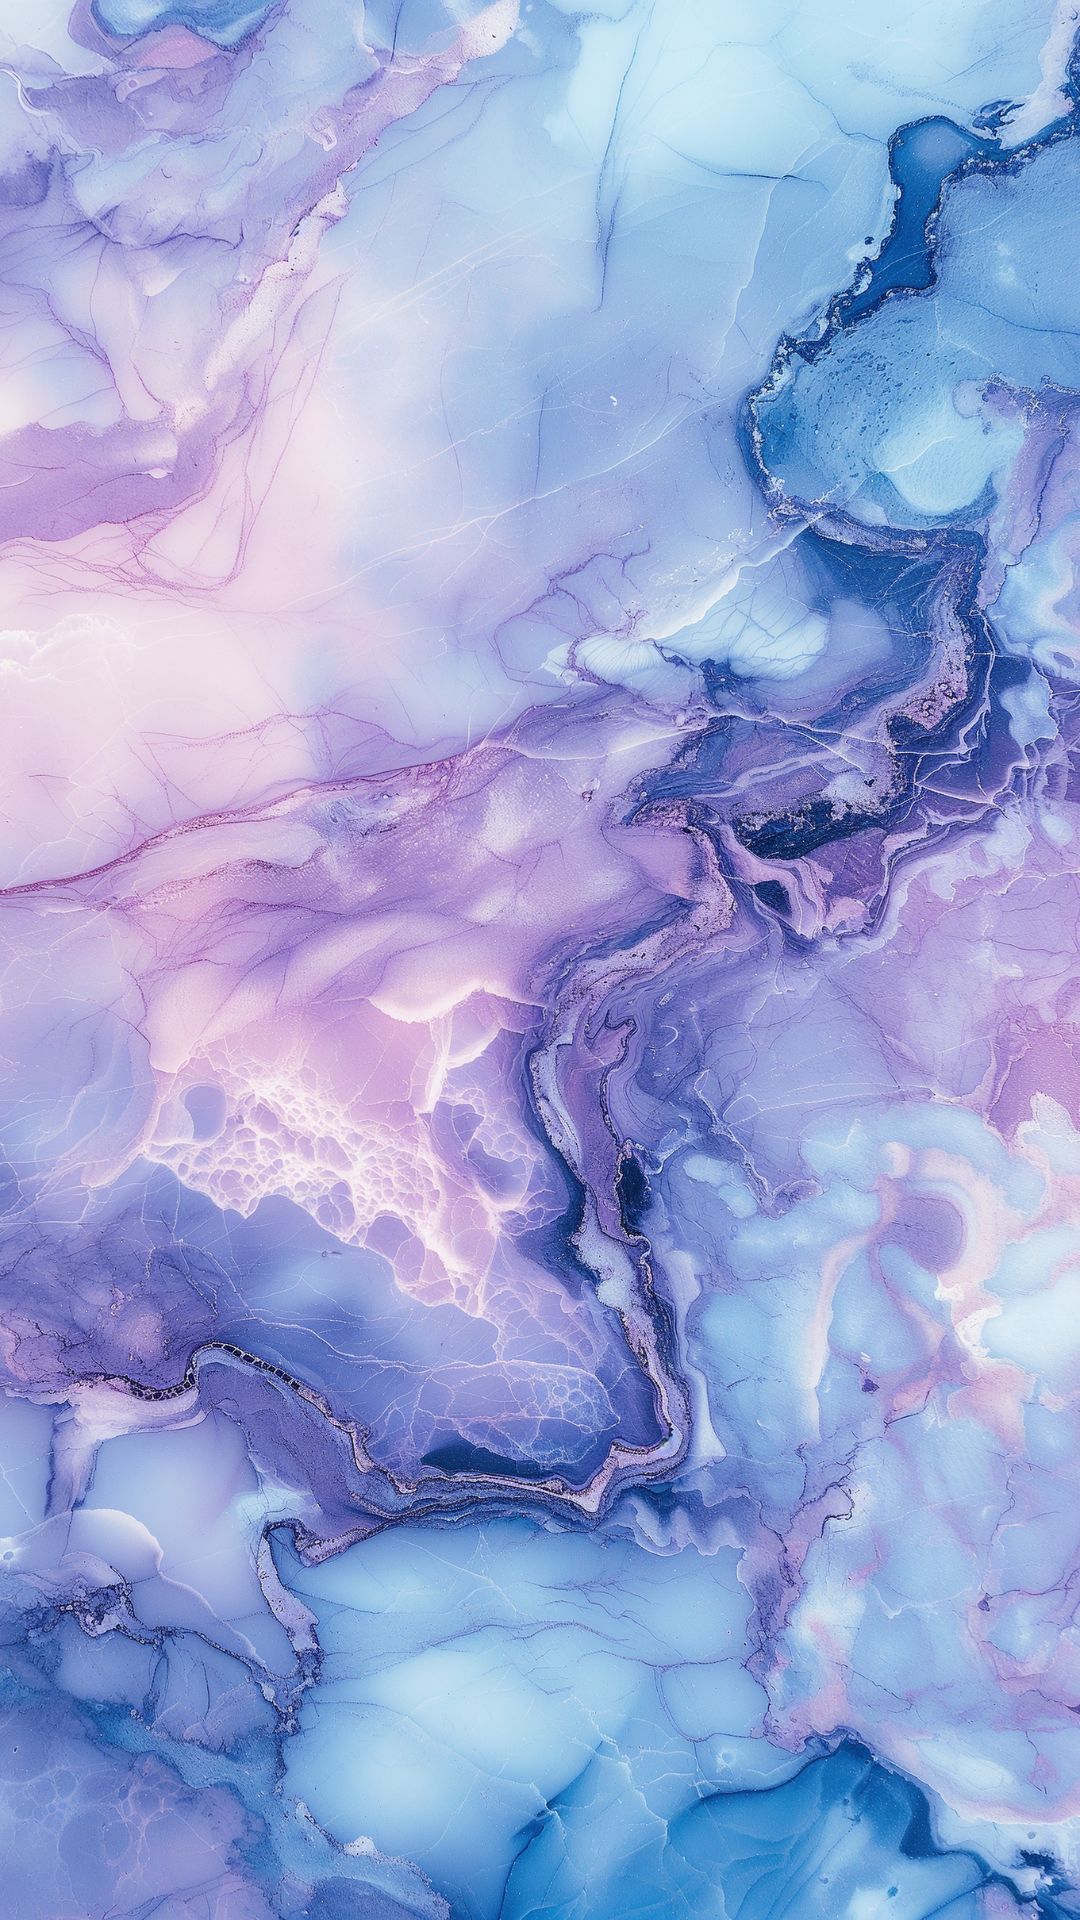 Upgrade Your Aesthetic with 24 Stunning Marble iPhone Wallpapers + 10 Midjourney Prompts - Sprinkle of AI Art